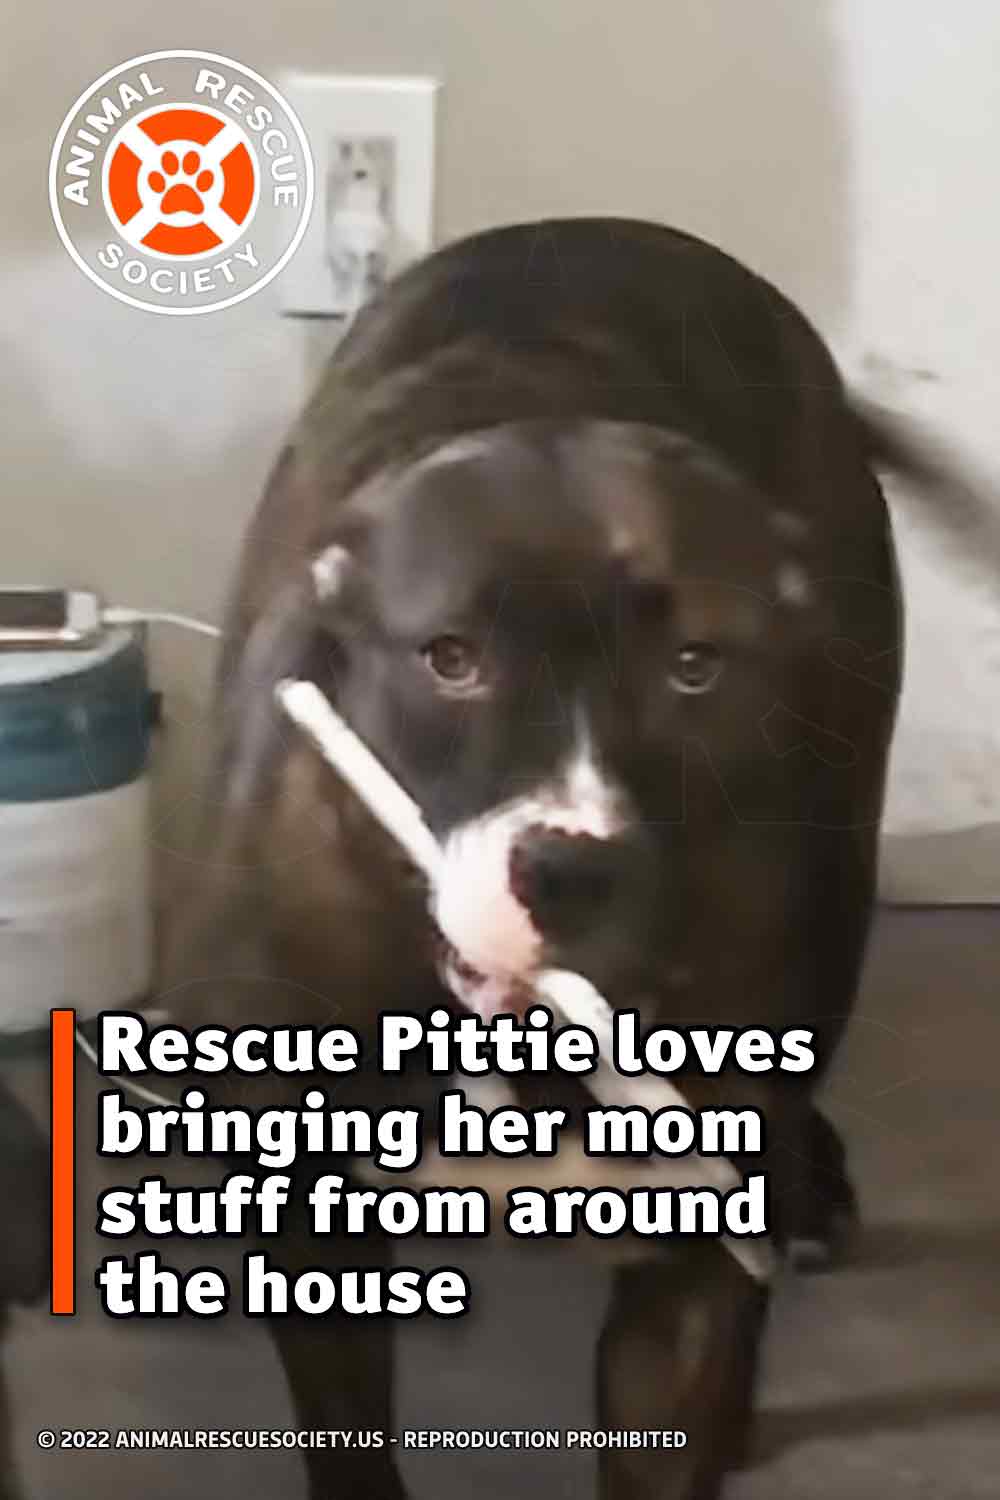 Rescue Pittie loves bringing her mom stuff from around the house.